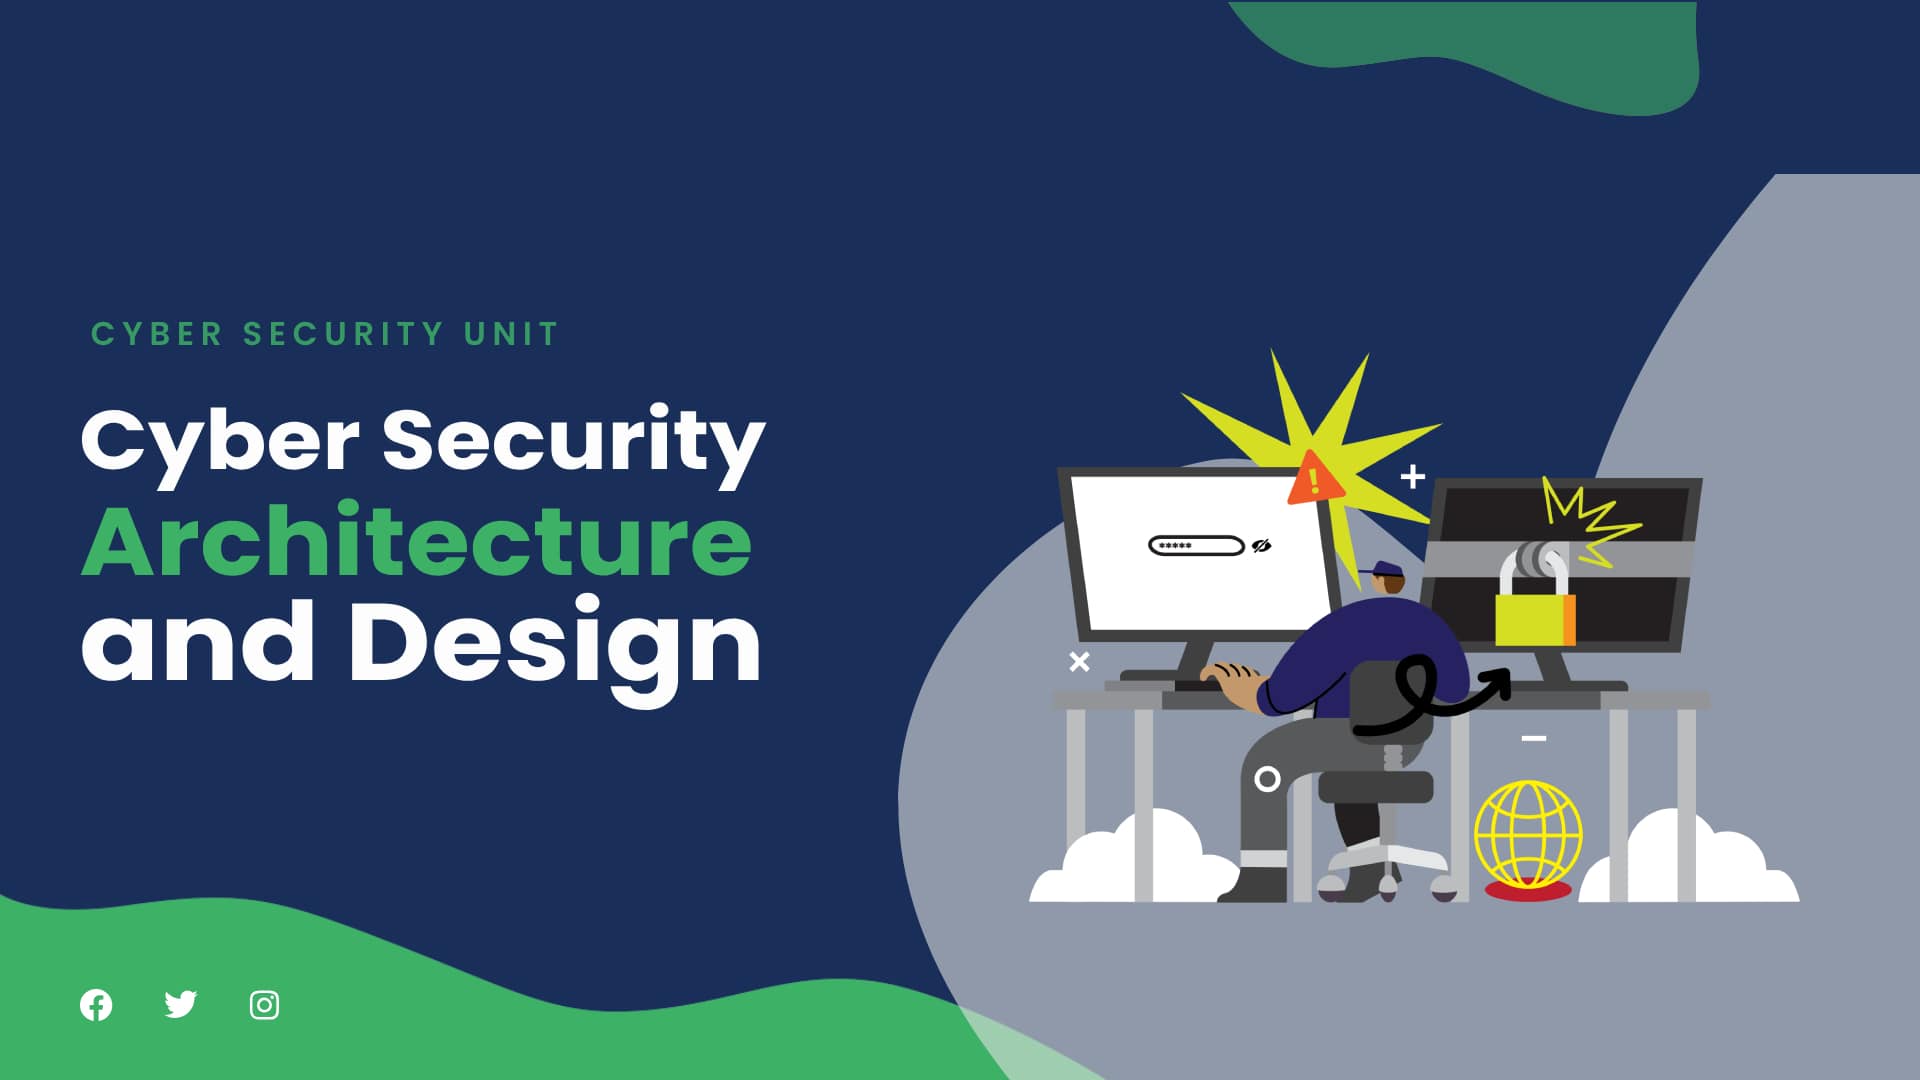 Cyber Security Architecture and Design